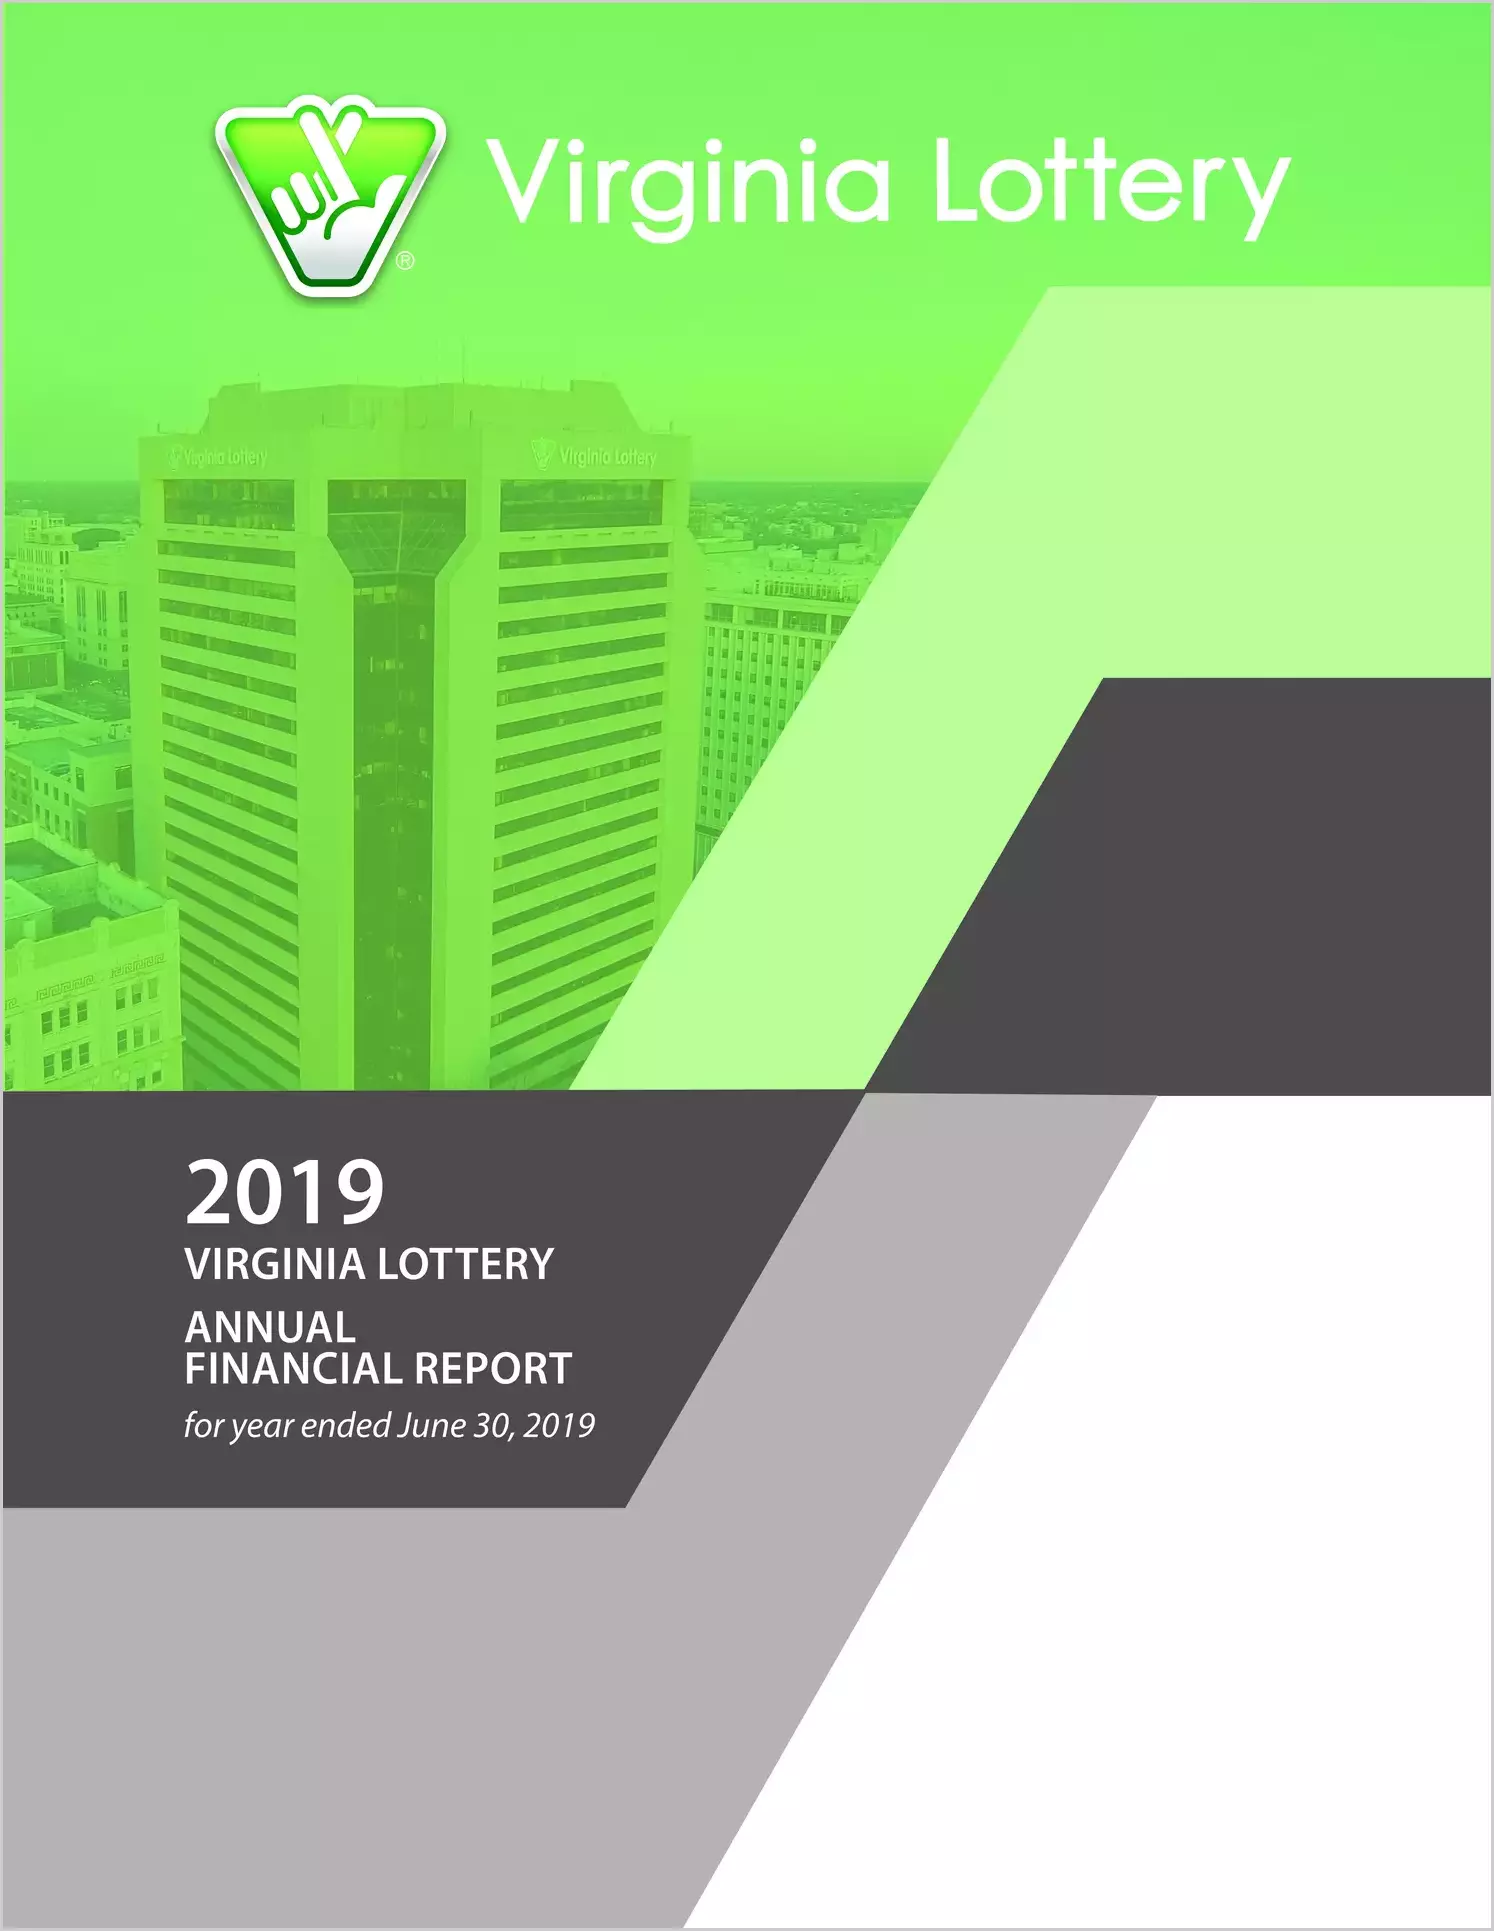 Virginia Lottery Financial Statements for the year ended June 30, 2019